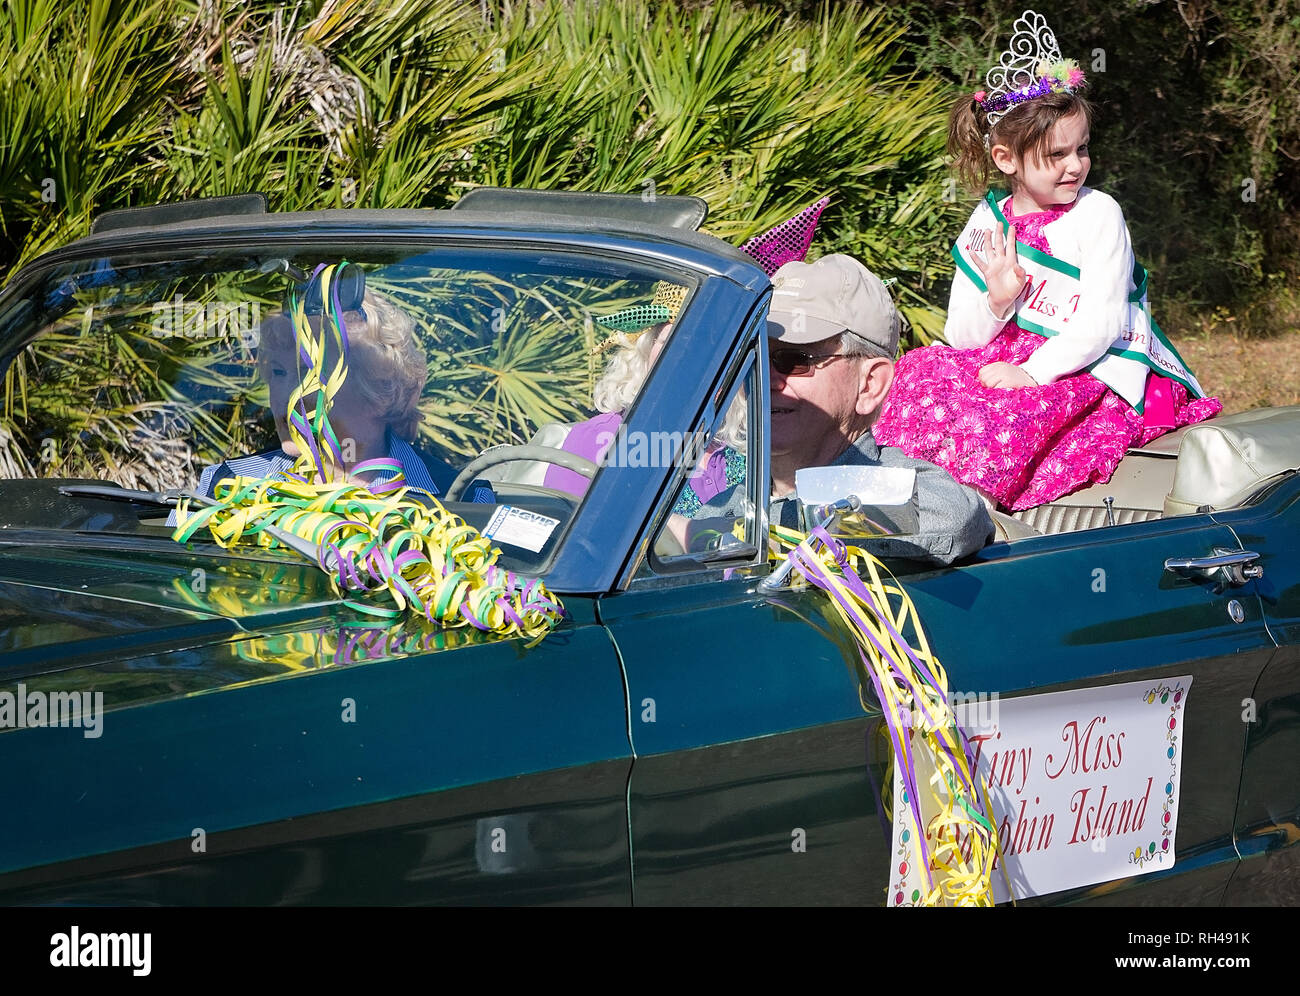 Tiny Miss Dauphin Island waves to the crowd as she rides in Dauphin Island’s first People’s Parade during Mardi Gras, Feb. 4, 2017, Stock Photo